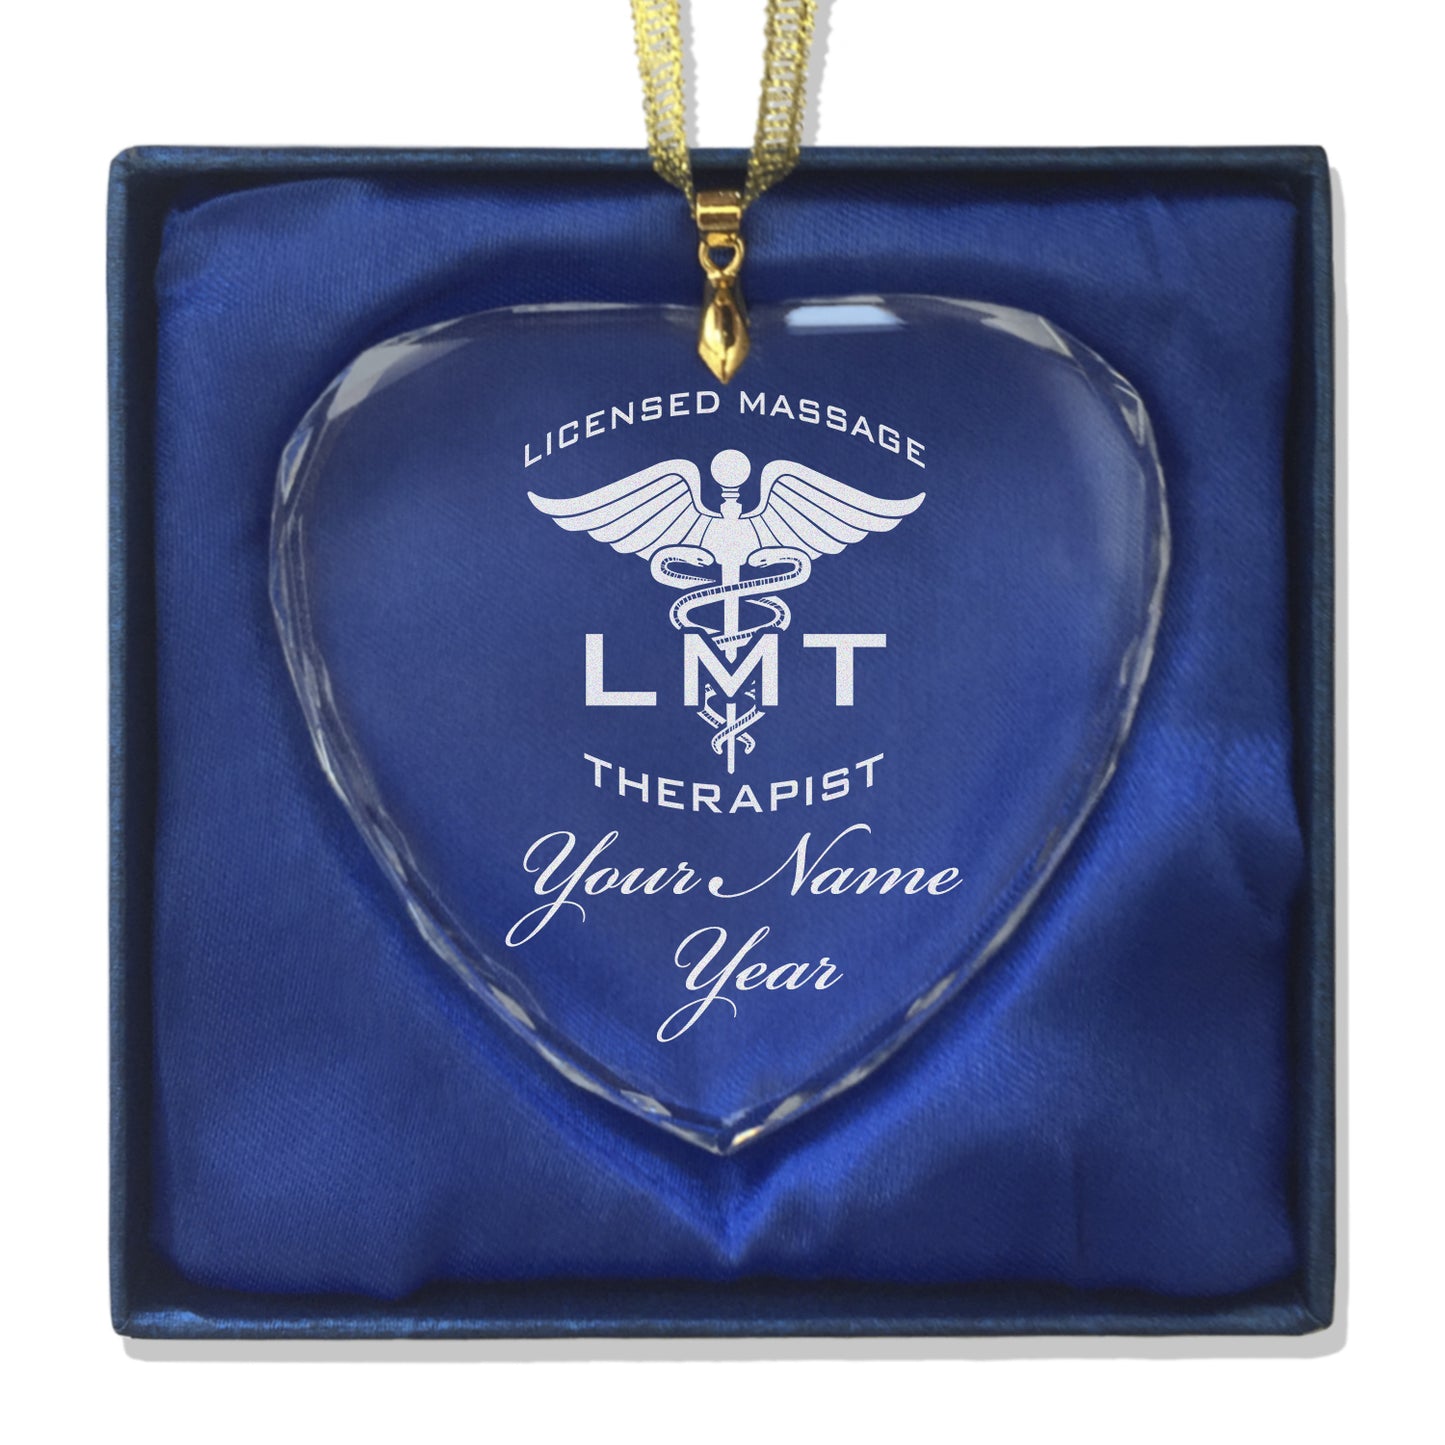 LaserGram Christmas Ornament, LMT Licensed Massage Therapist, Personalized Engraving Included (Heart Shape)